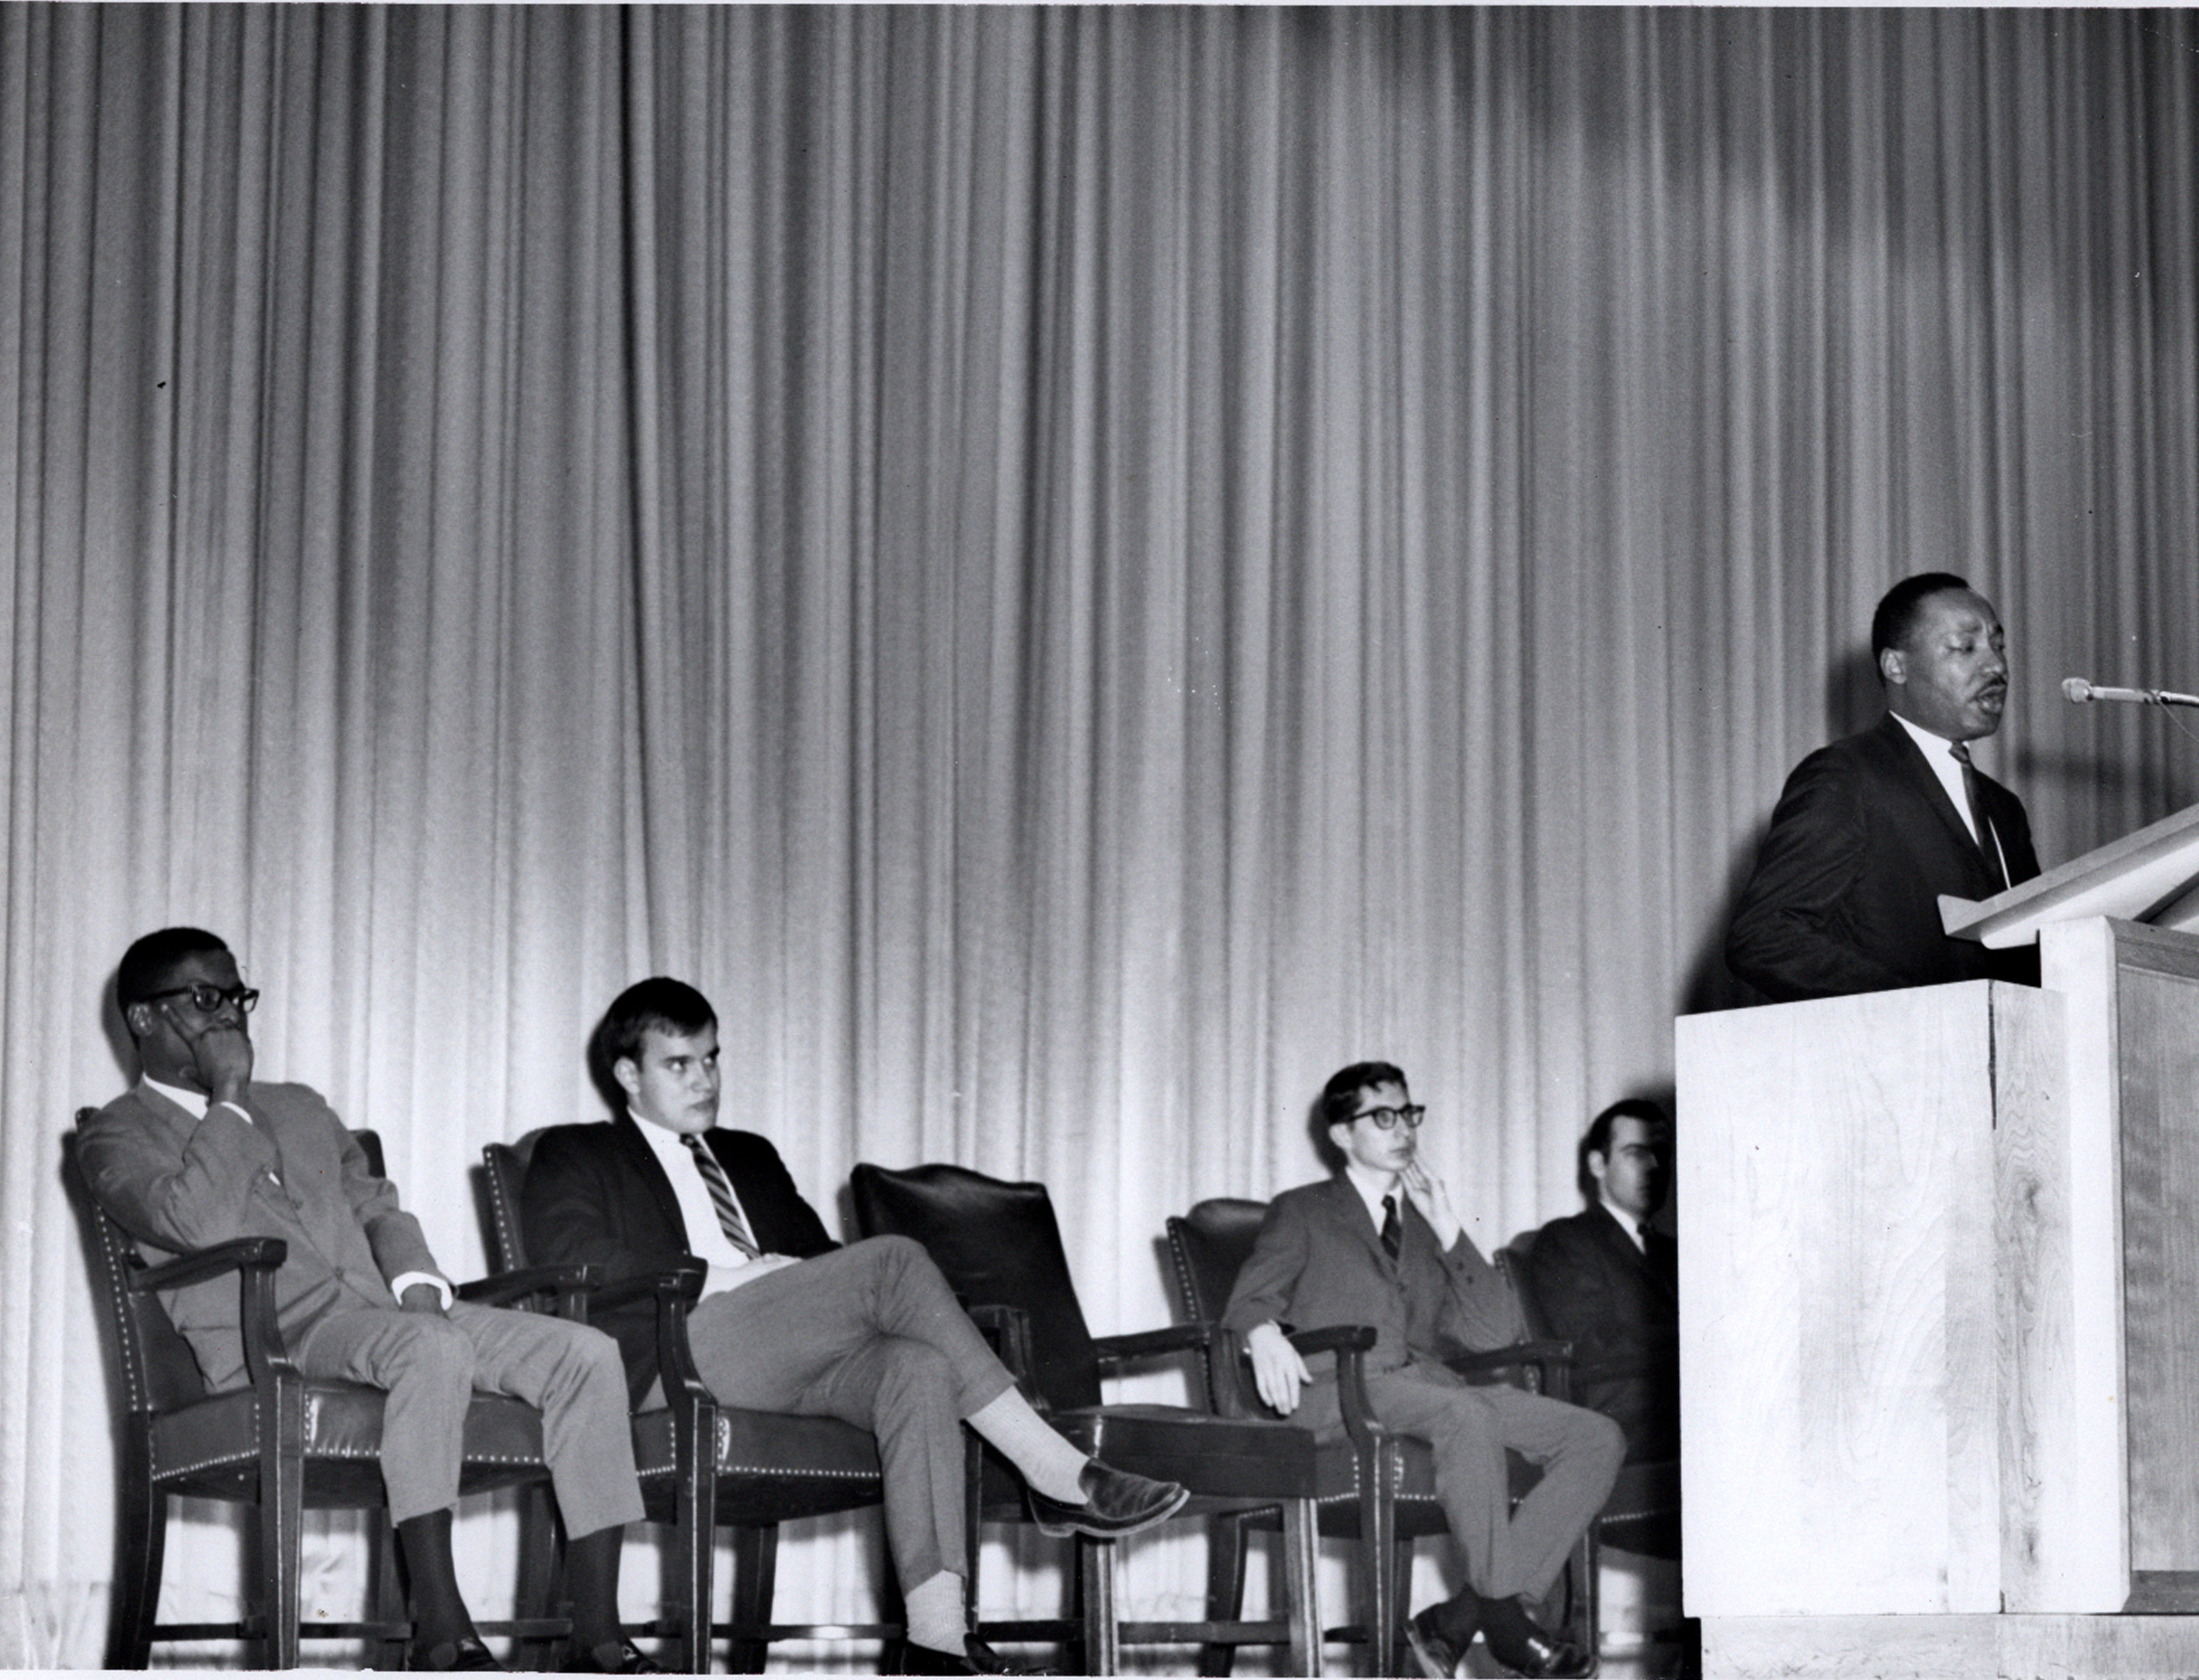 Martin Luther King Jr. at SMU on 17 March 1966